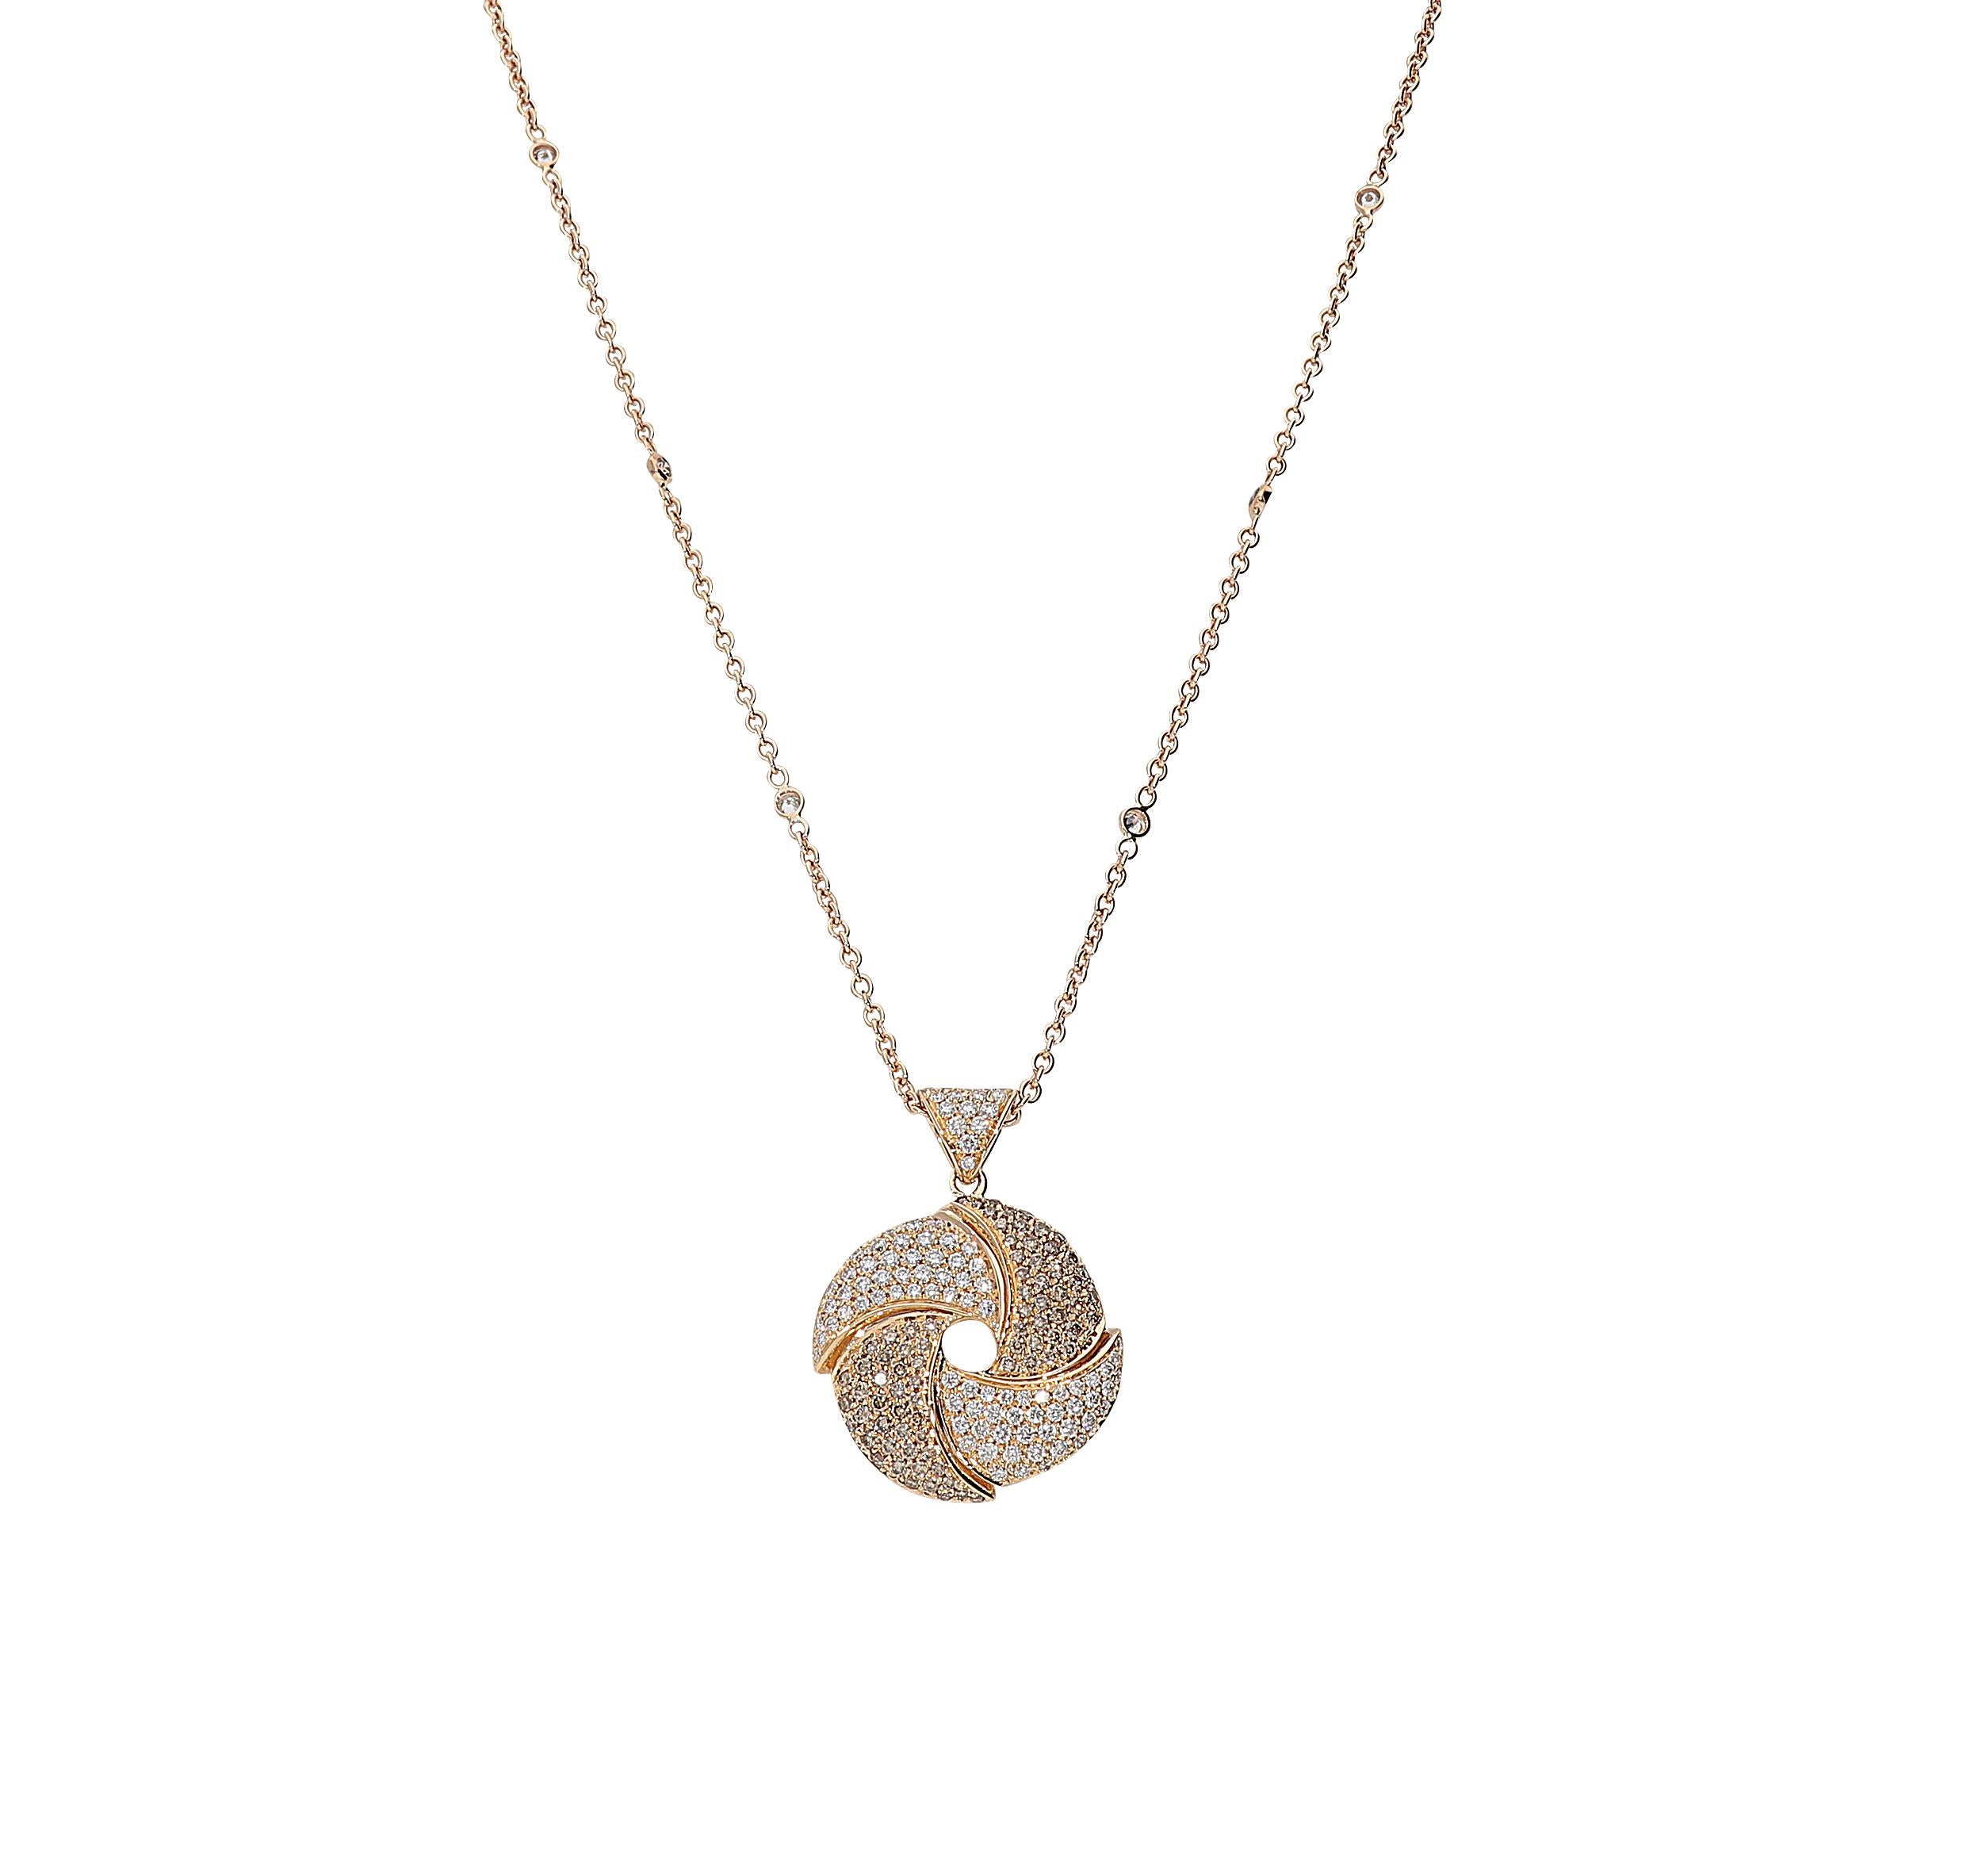 Stylish necklace in 18kt pink gold for 12,50 grams composed by a contoured pinwheel pendant and a 43 centimeters long chain with adjustment ring at 40.
The pendant is 3,20 centimeters in hight and 2,50 centimeters in width. Two parts with white